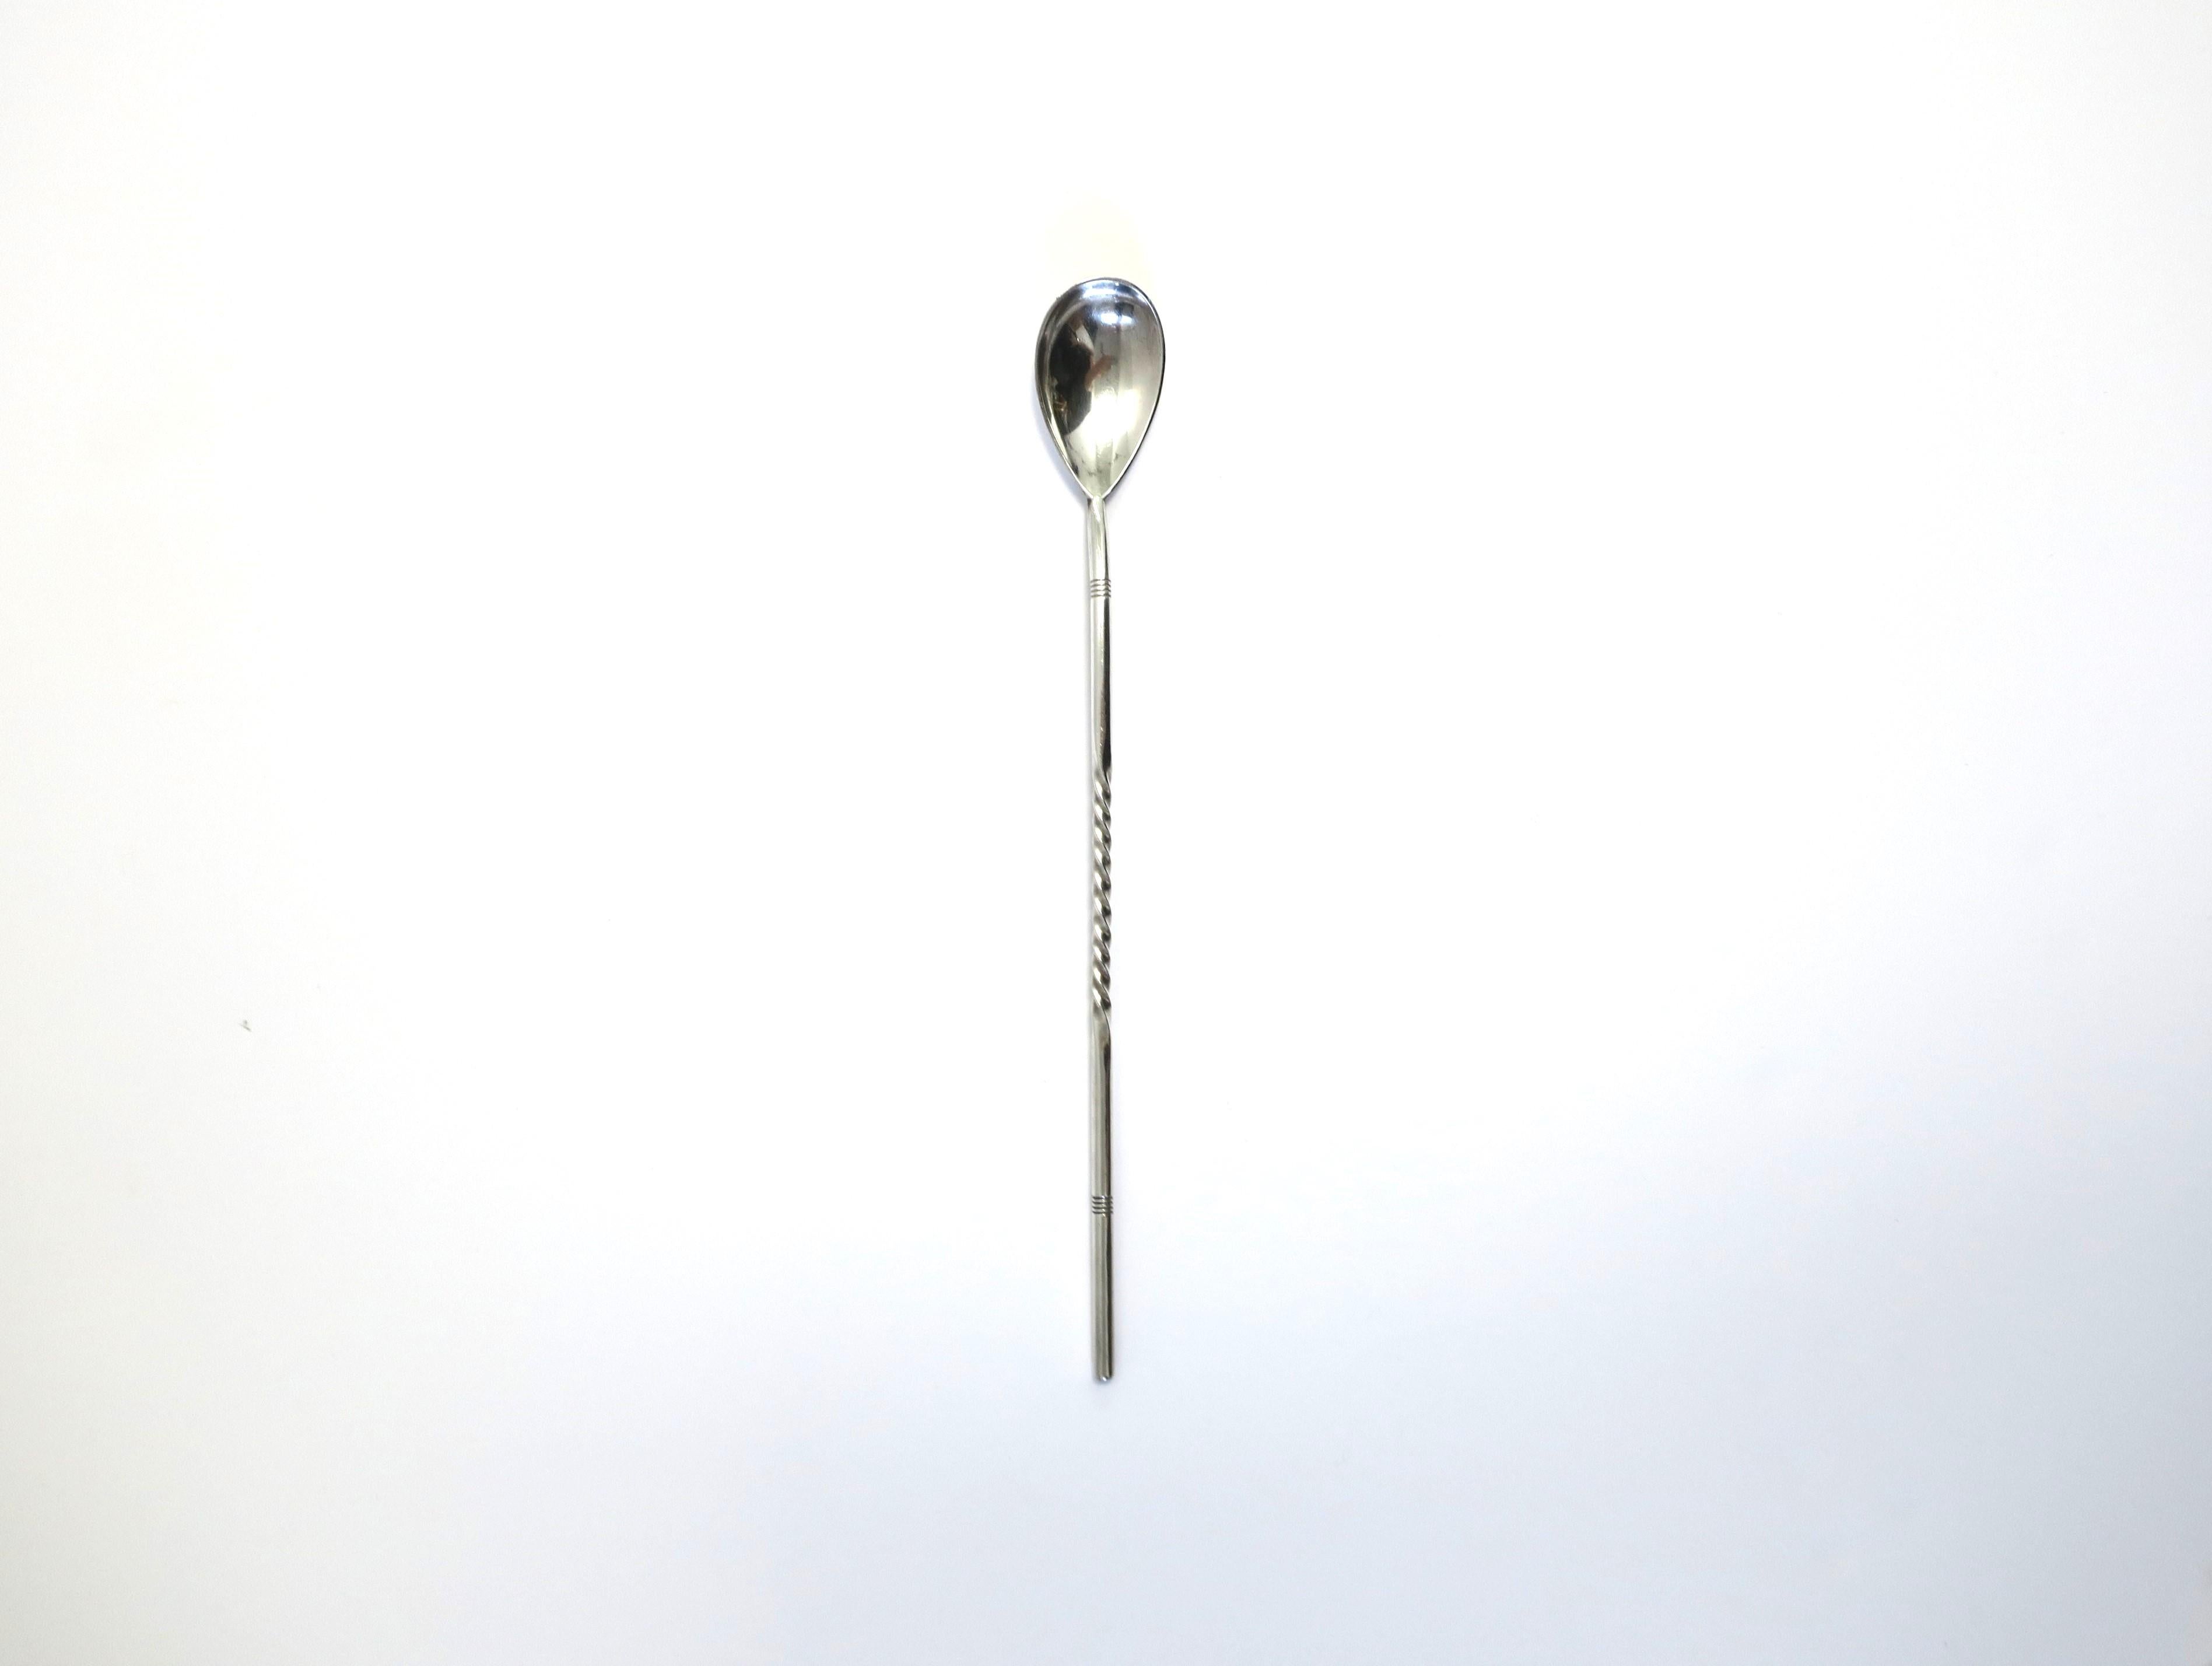 A silver-plate cocktail stirrer and spoon with twist detail, Midcentury Modern period, by Gorham Co., circa mid-20th century, USA. A great vintage barware piece for any bar, bartender, mixologist, etc. Makers' mark on underside, 'Gorham Co., 'N52',